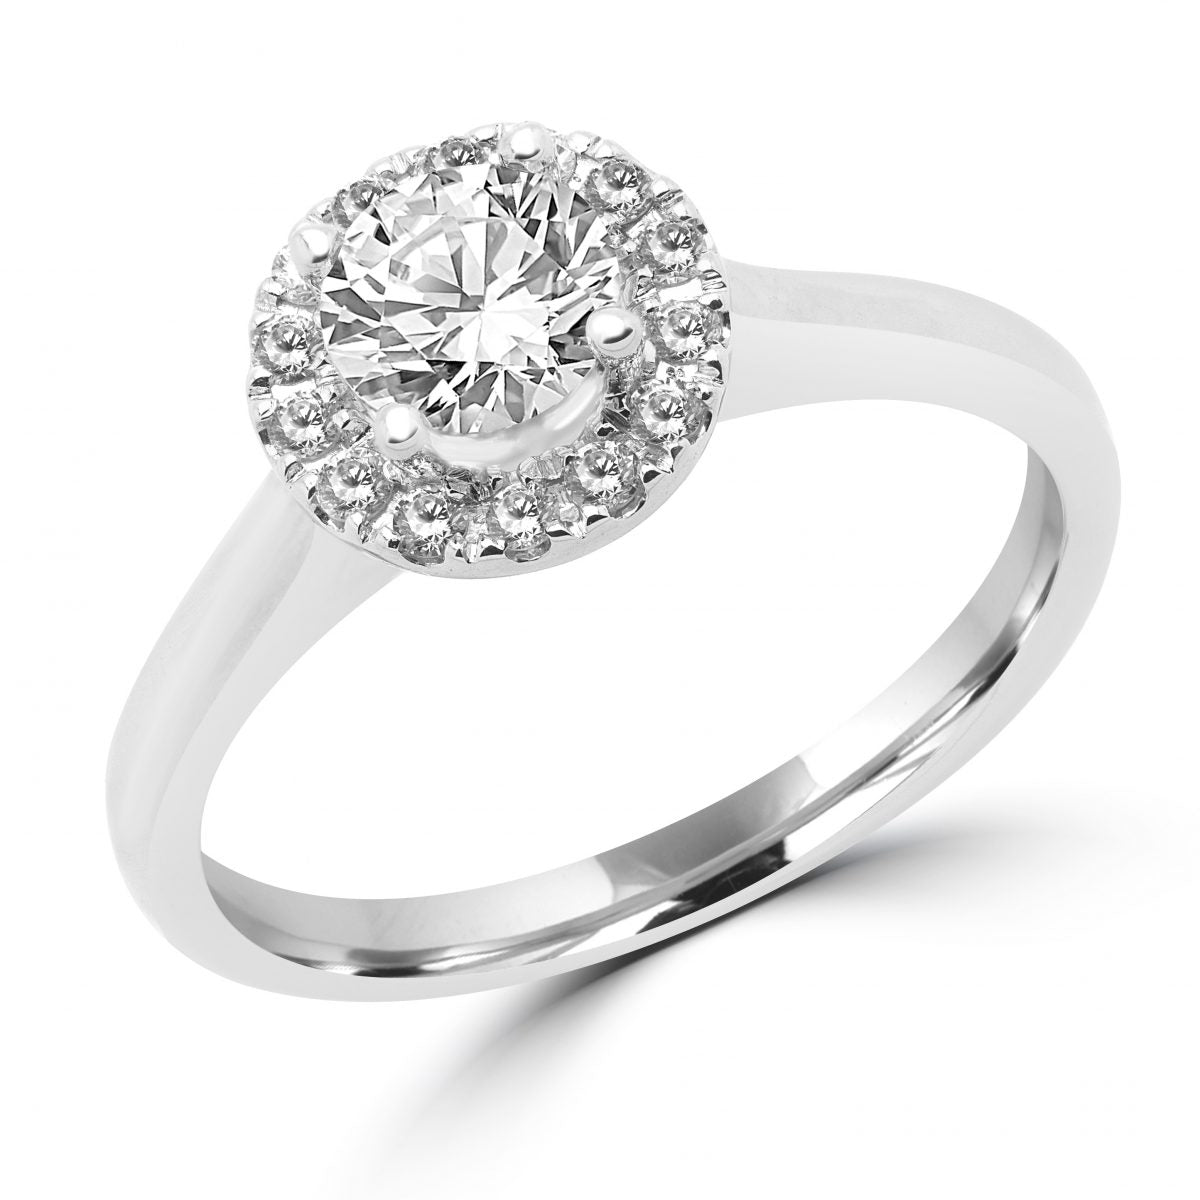 Striking halo ring 0.16 (ctw) with CZ center in 14k white gold